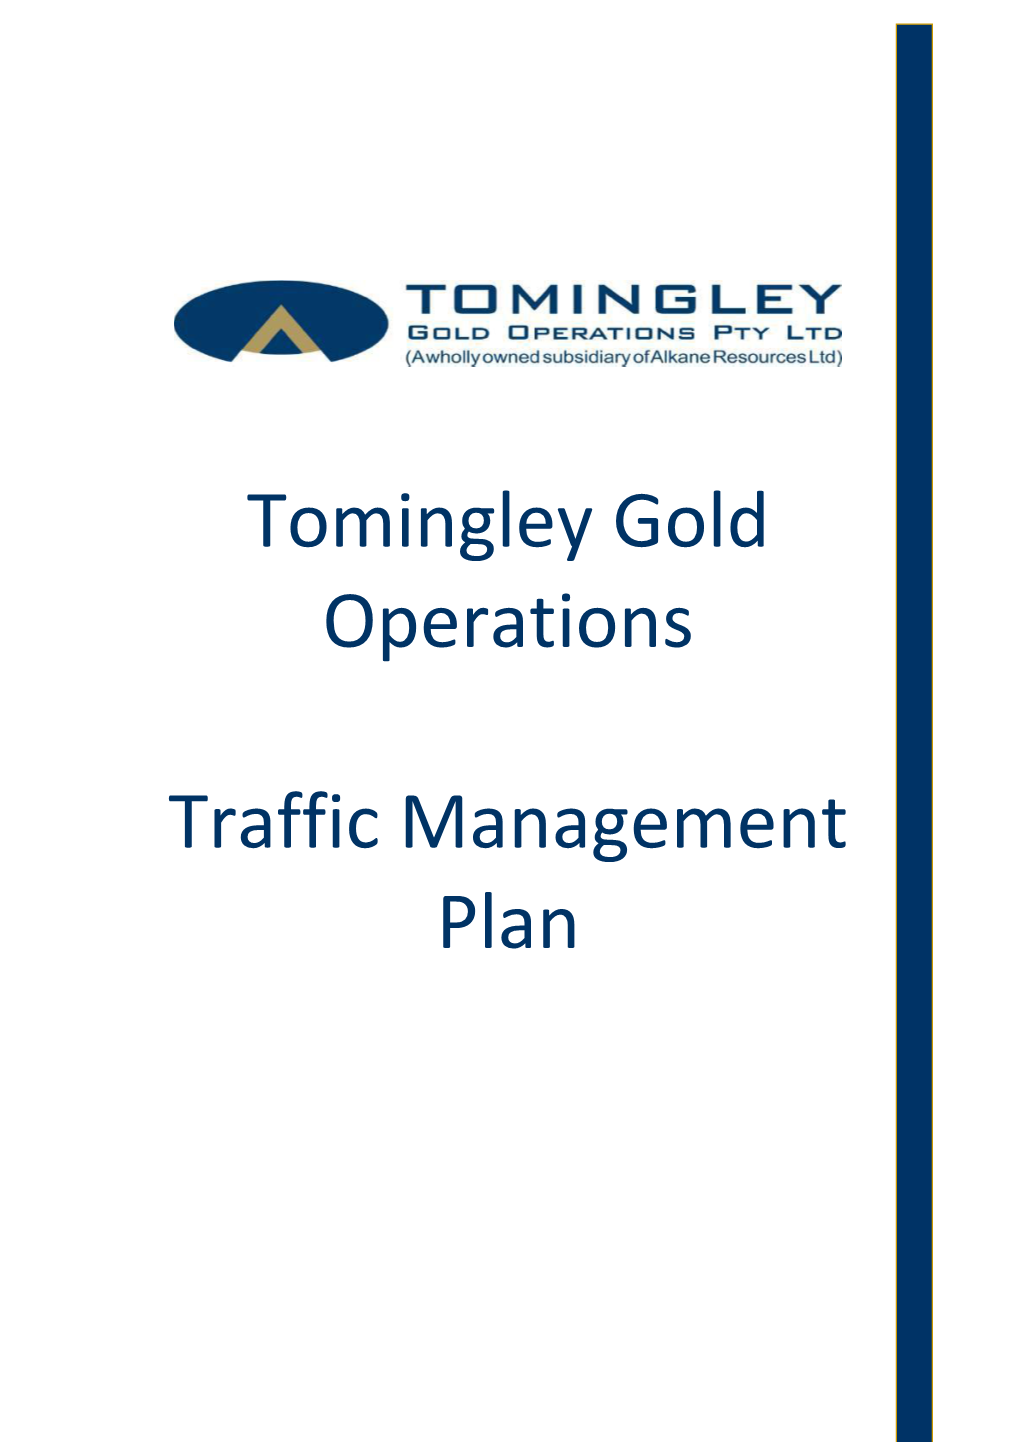 Tomingley Gold Operations Traffic Management Plan